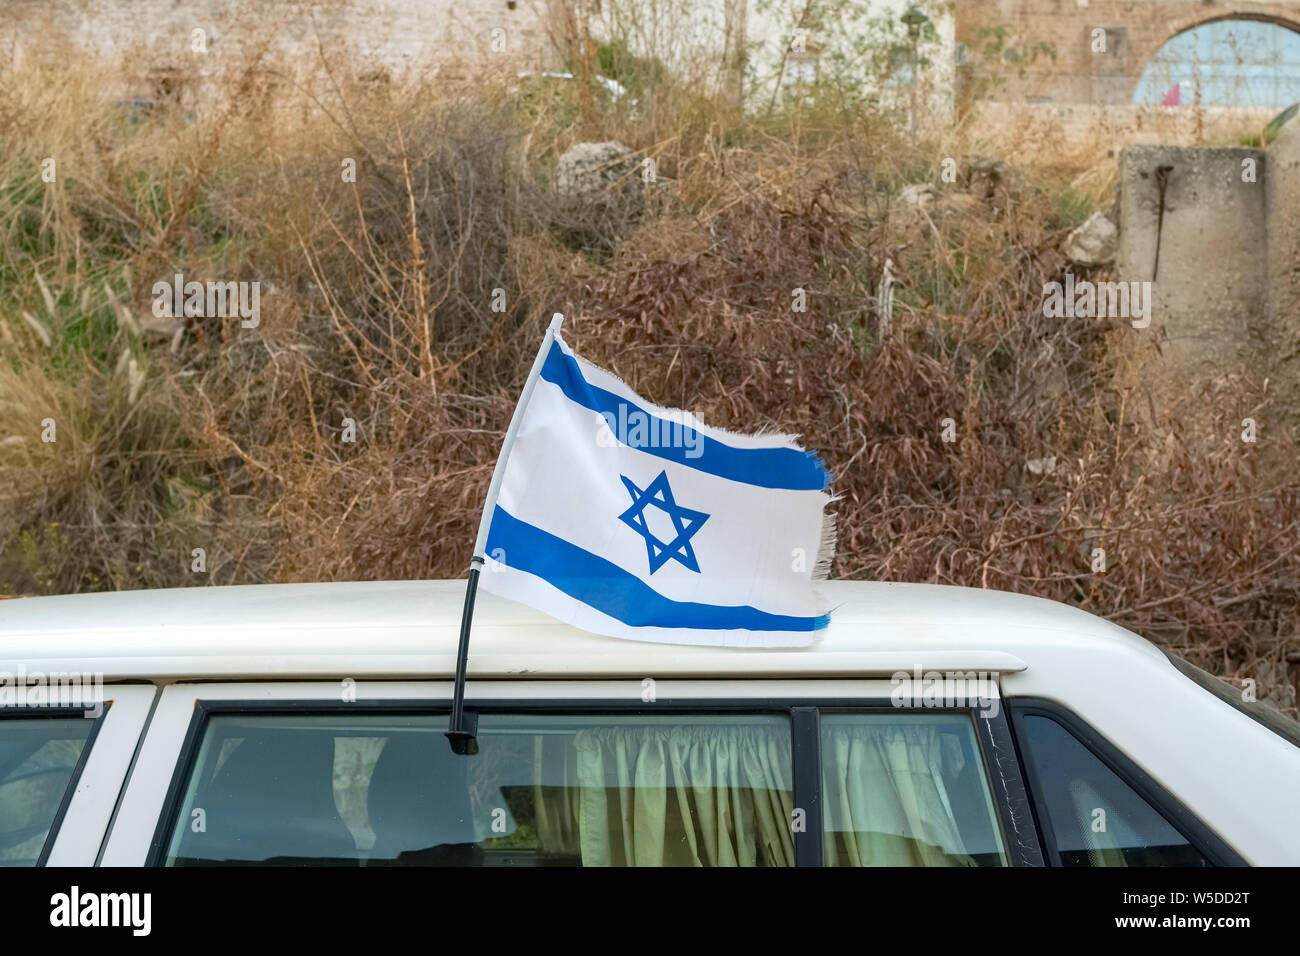 Israeli flag on a car, blue and white Magen David, Israel Stock Photo